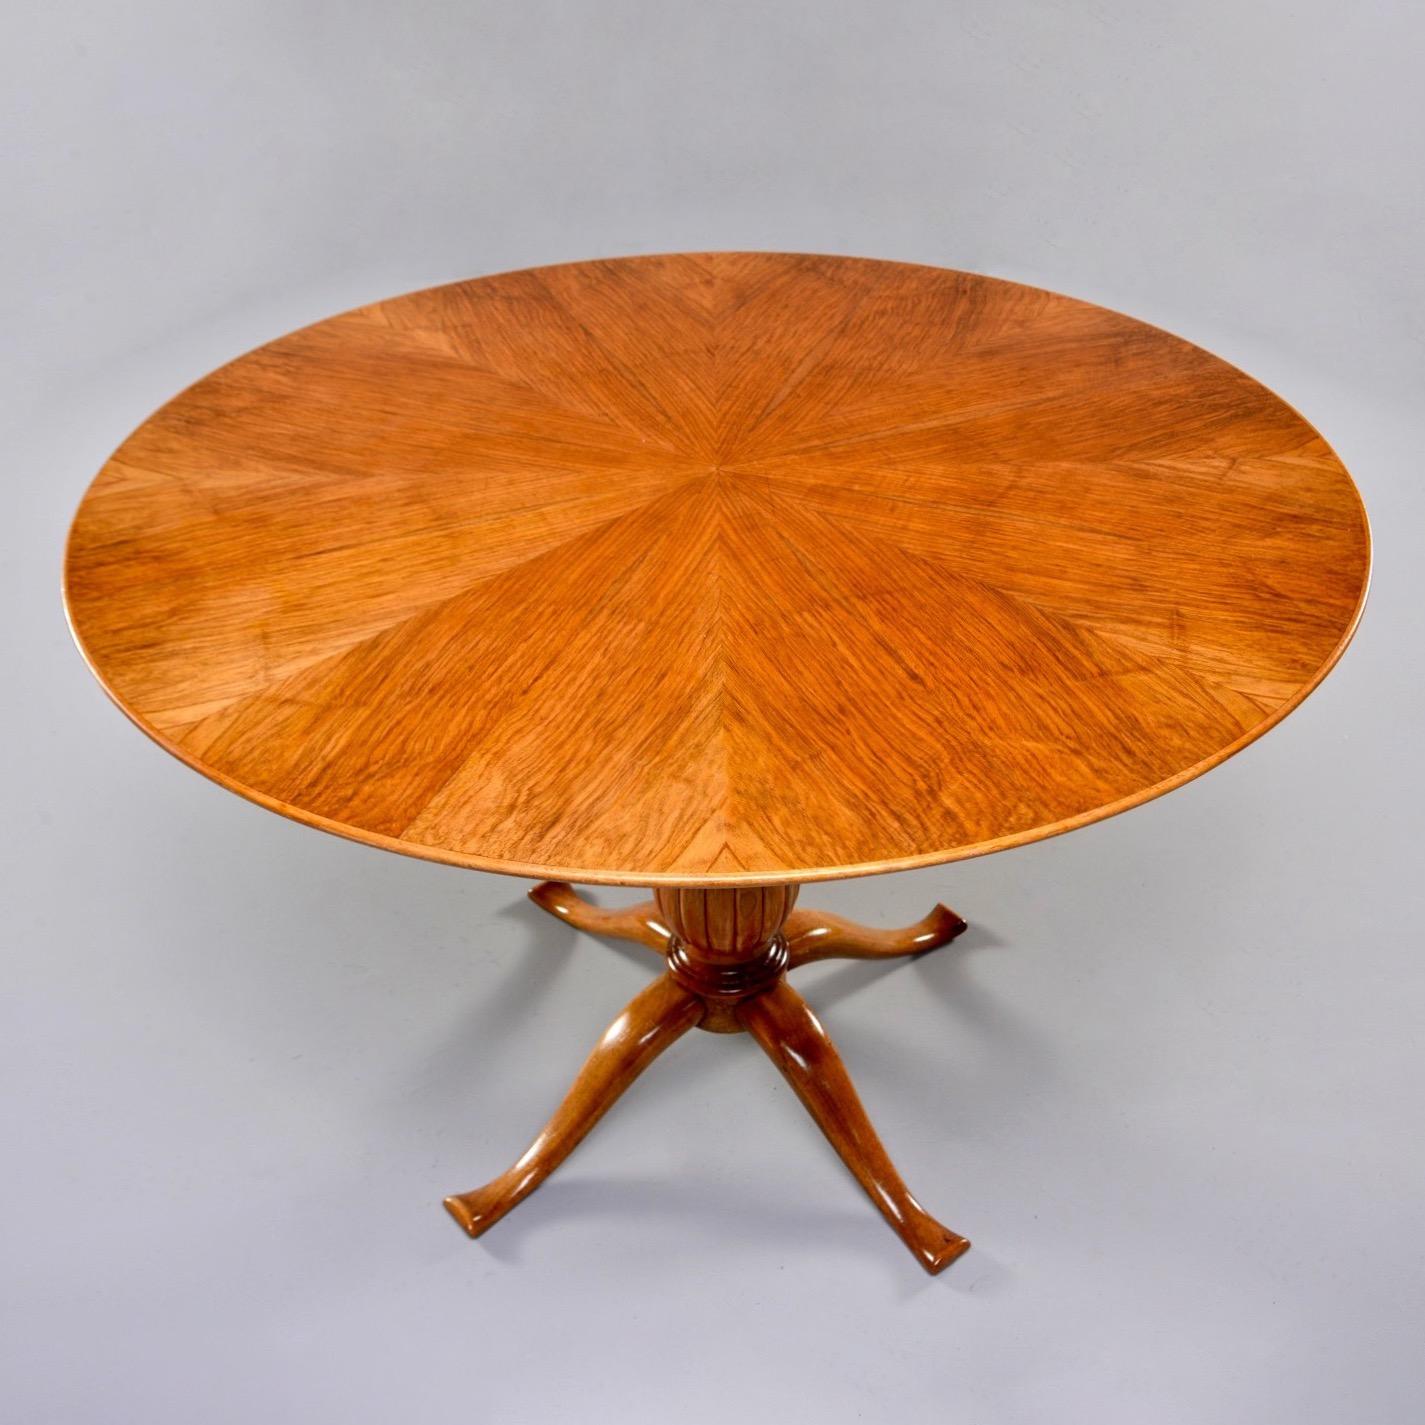 Italian small round beech table has a four legged pedestal base and urn shaped center column with reeded surface, circa early 1960s. Round tabletop is 43” in diameter and features a veneer starburst pattern. Unknown maker.

Knee Clearance: 29”.
  